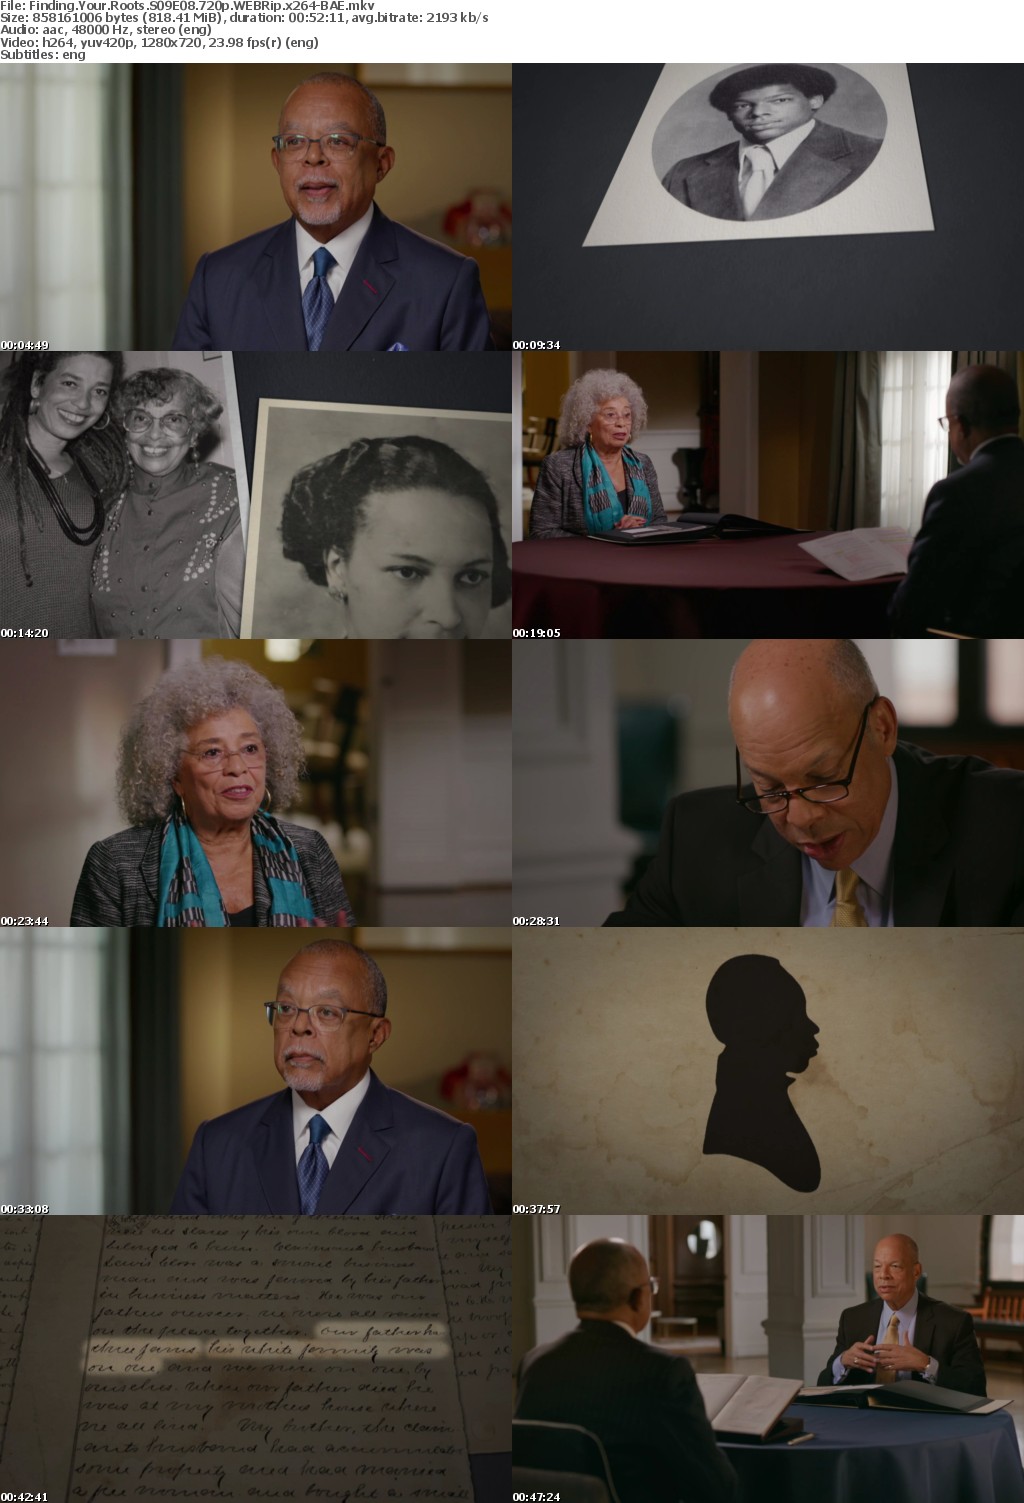 Finding Your Roots S09E08 720p WEBRip x264-BAE